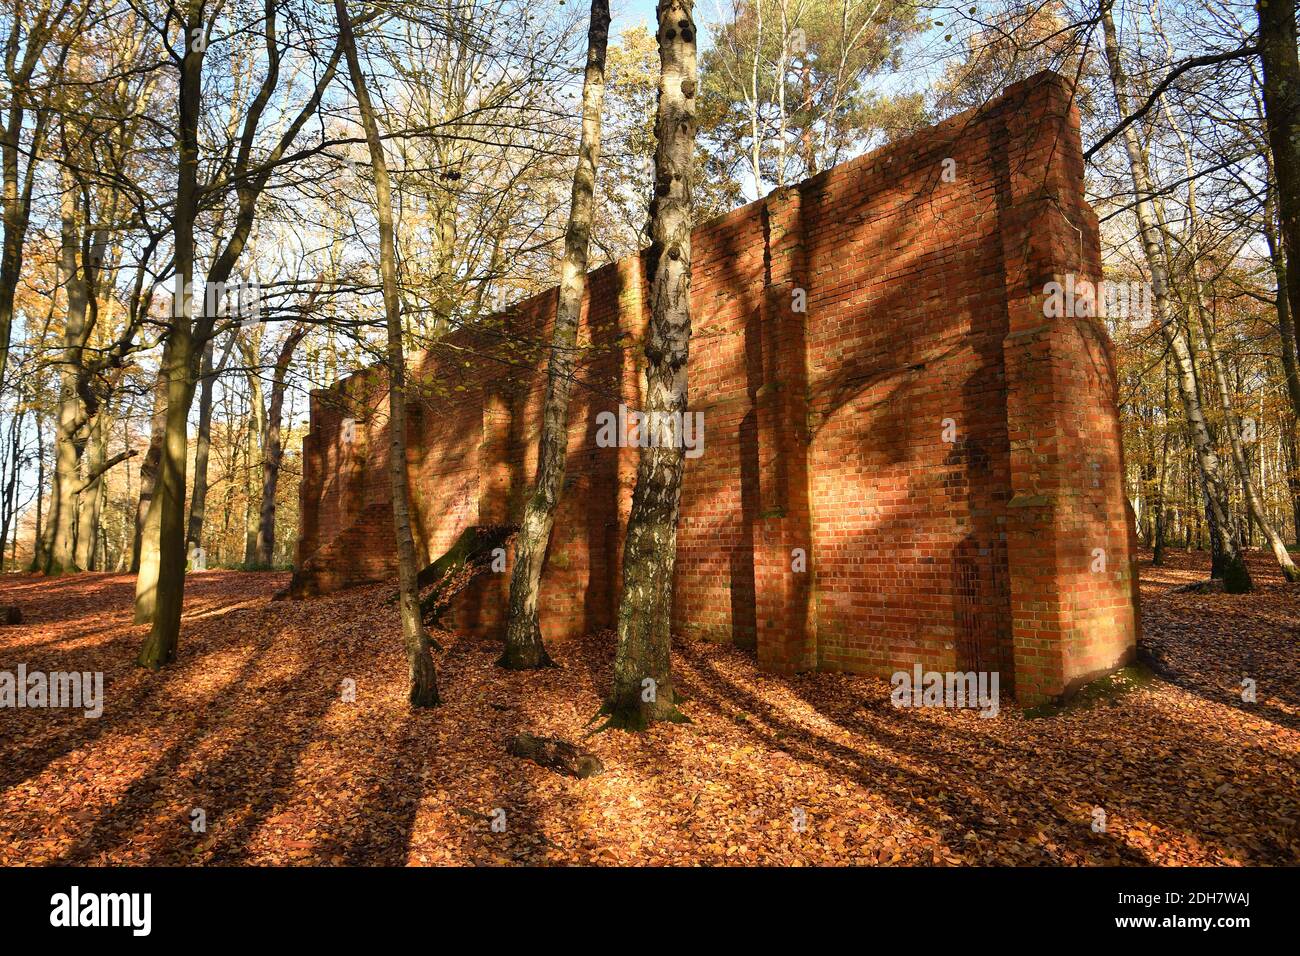 Photos for a feature on Wellesley Woodland, Aldershot - Autumn weekend walks feature. One of two WW1 Firing Walls, used for machine gun practice, Thursday 12th November 2020. Stock Photo